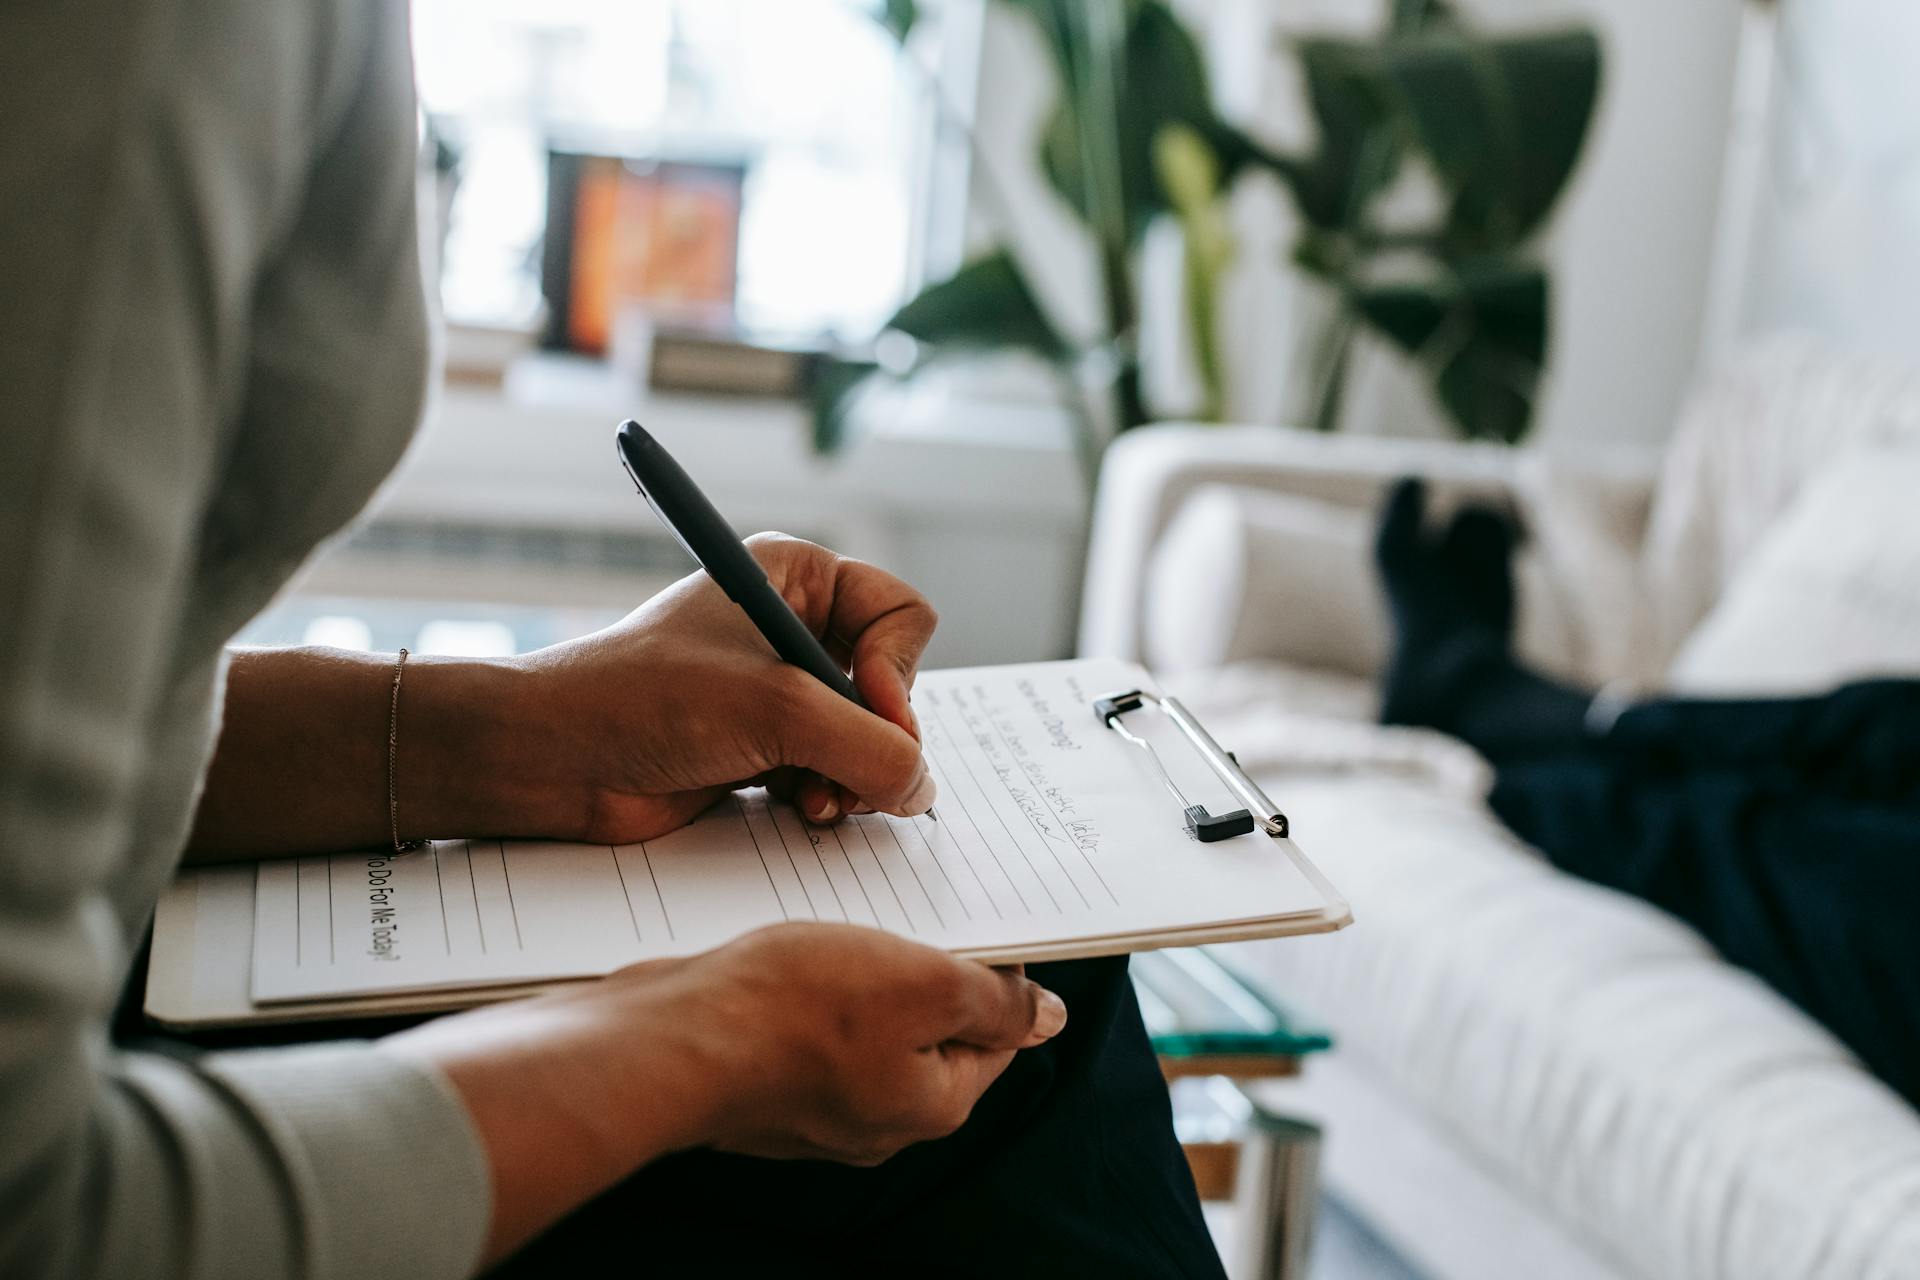 A psychologist taking notes during a session | Source: Pexels